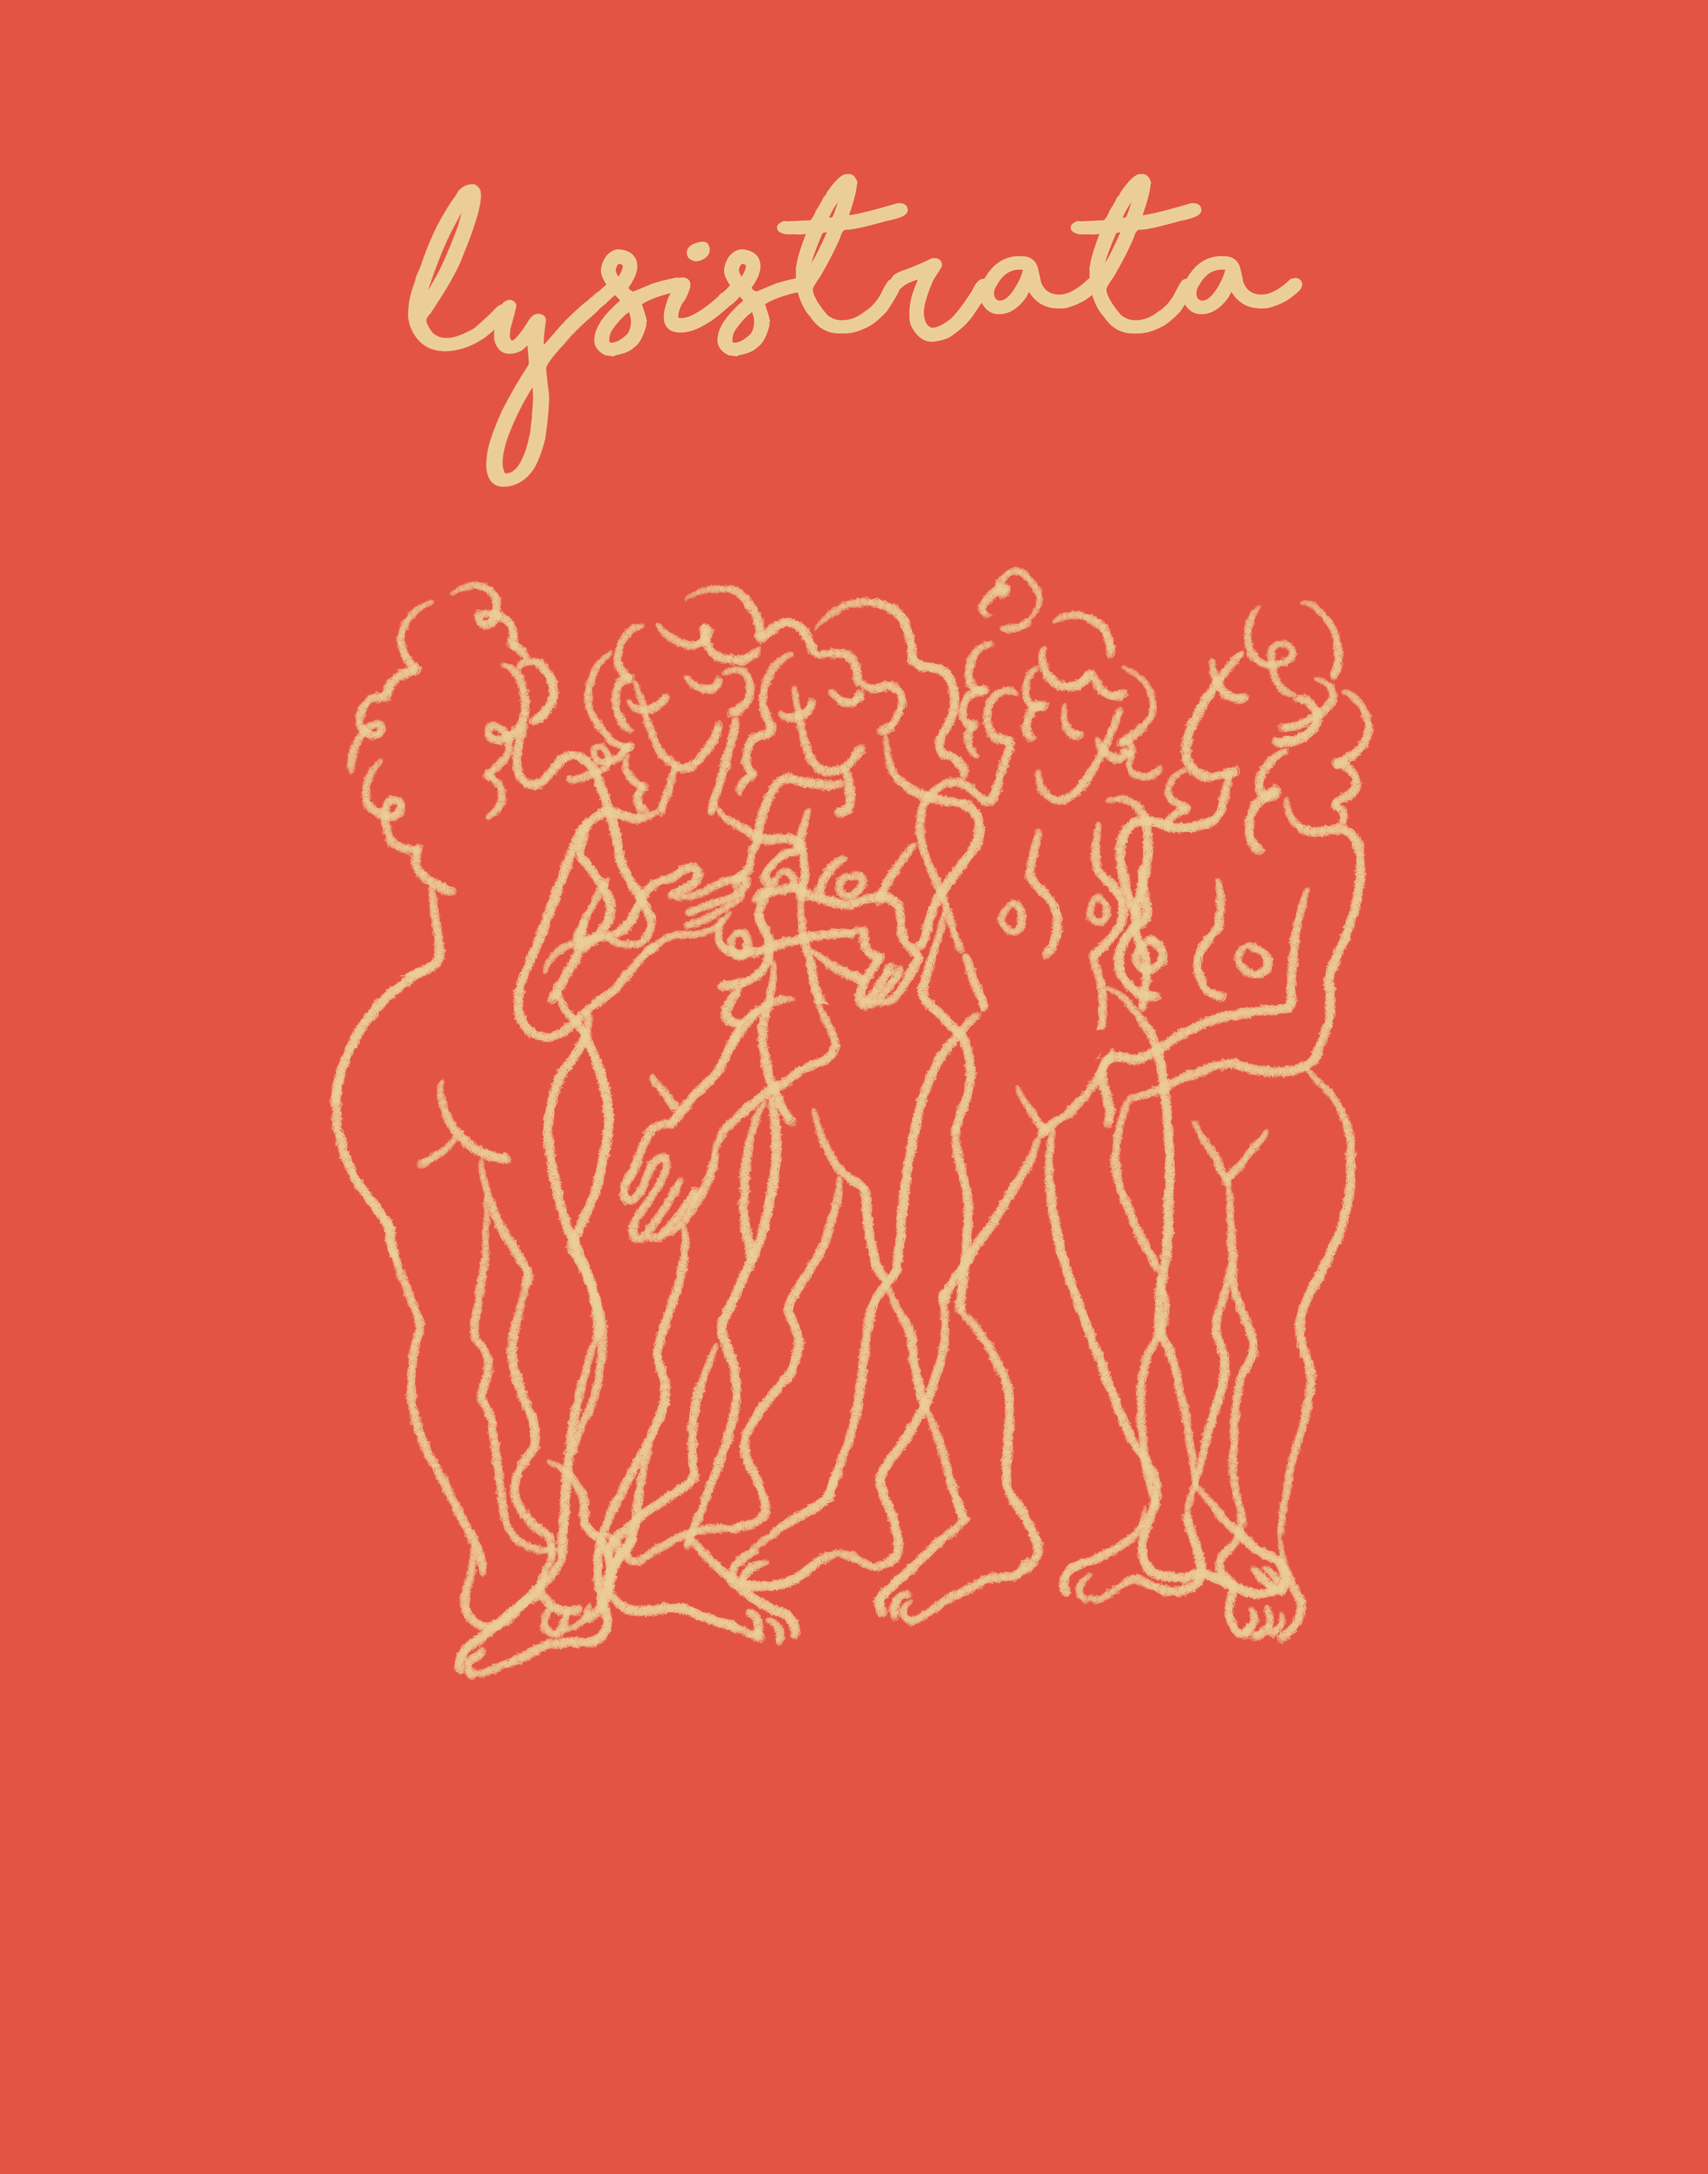  Poster for  Lysistrata , a play about women going on a sex strike to prevent their husbands from continuing the Peloponnesian War.&nbsp; 